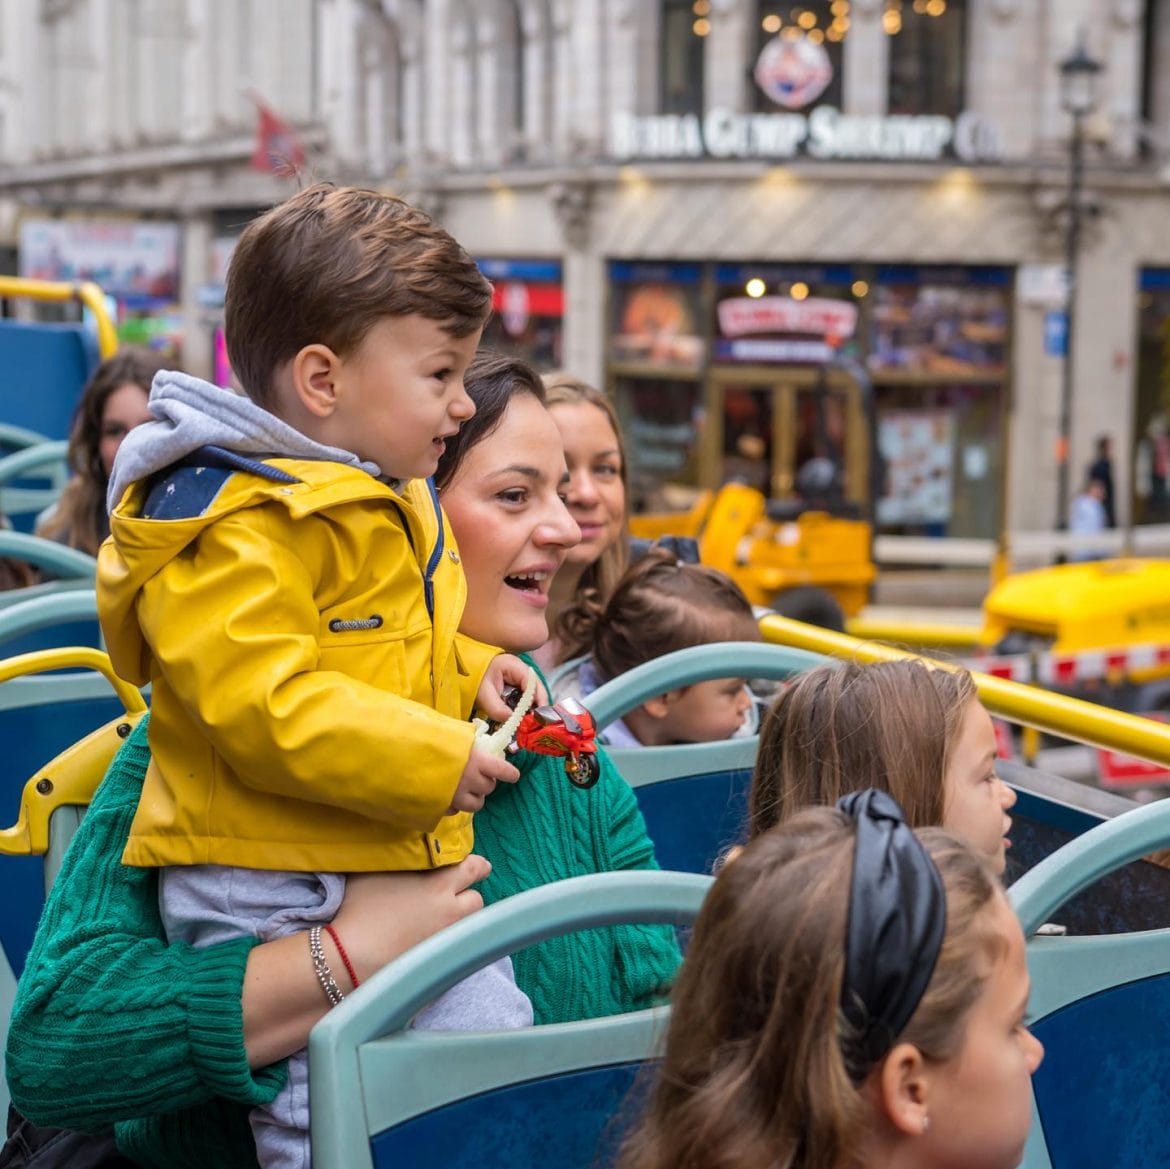 Tootbus Kids Bus Tour: Save Up to 20% with Wowcher's Exclusive Deal